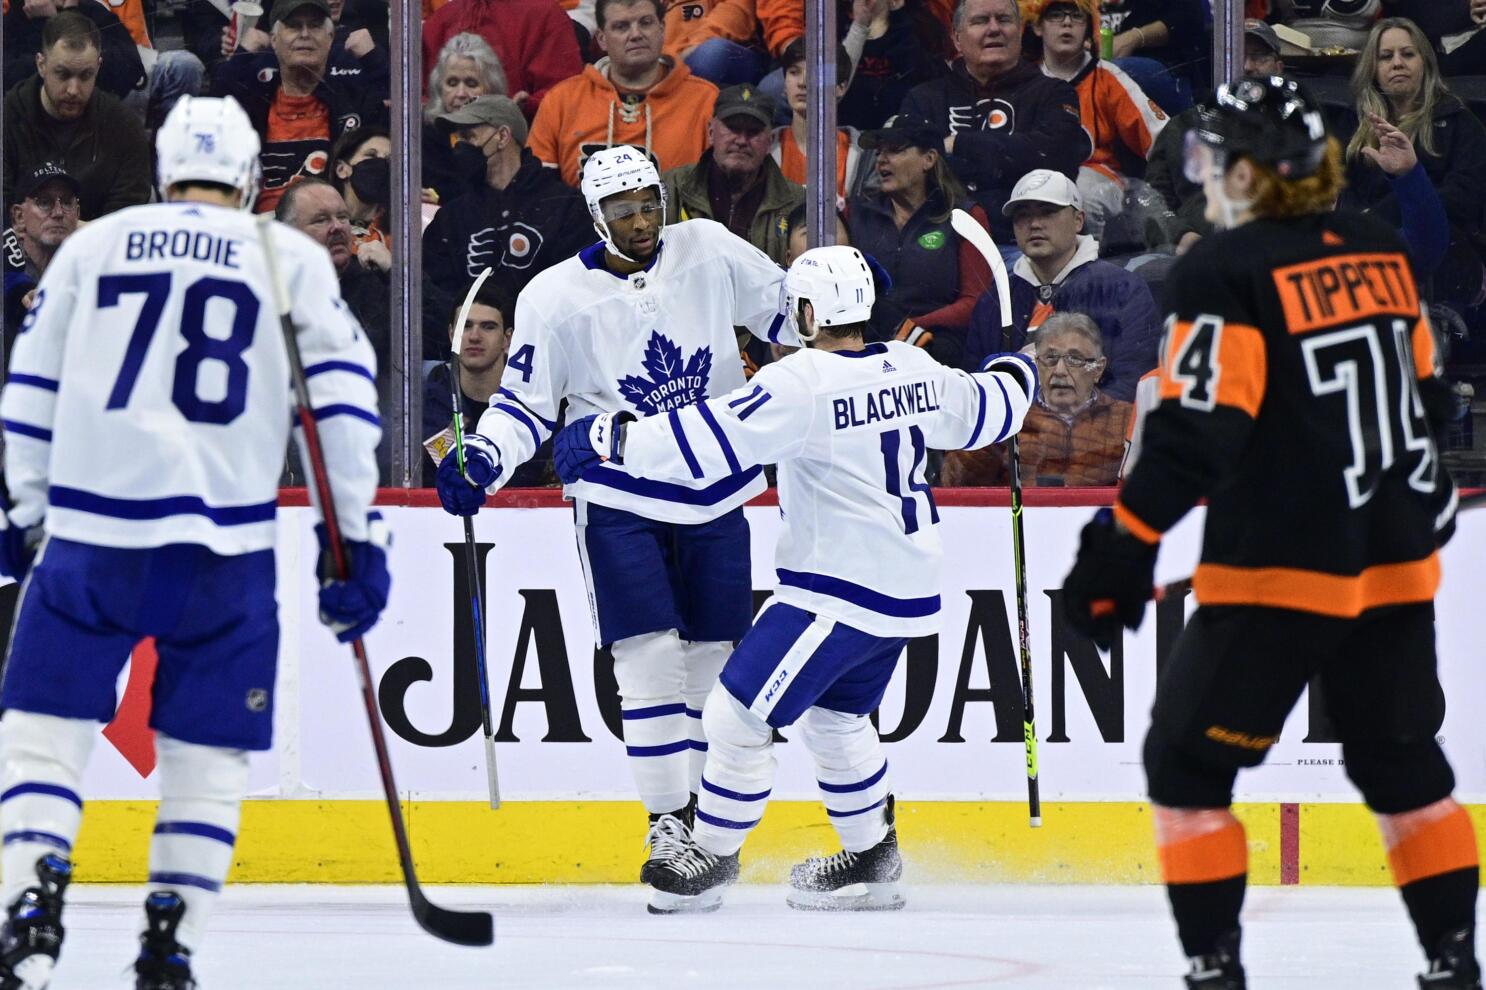 Sheldon Keefe: We have really missed Wayne Simmonds since he left